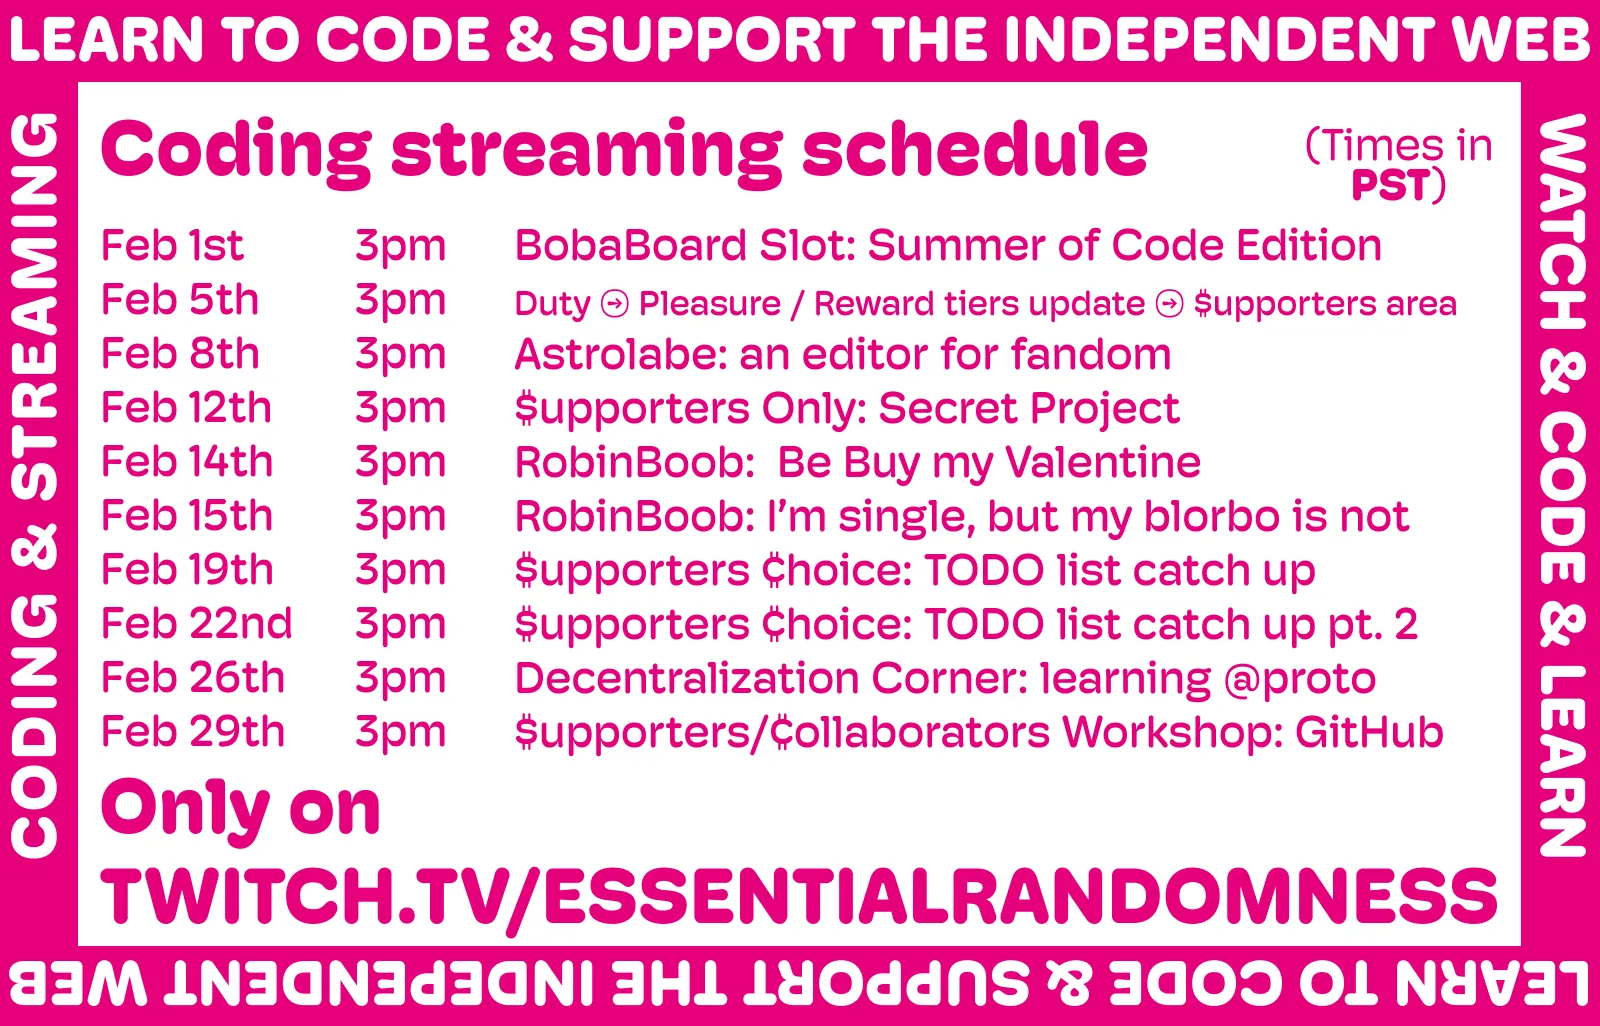 
A megenta and white image announcing the new streaming schedule. It reads:

Coding streaming schedule (all streams at 3PM PST)

Feb 1st - BobaBoard Slot: Summer of Code Edition
Feb 5th - Duty → Pleasure / Reward tiers update → $upporters area
Feb 8th - Astrolabe: an editor for fandom
Feb 12th - $upporters Only: Secret Project
Feb 14th - RobinBoob:  Be Buy my Valentine
Feb 15th - RobinBoob: I’m single, but my blorbo is not
Feb 19th - $upporters ¢hoice: TODO list catch up
Feb 22nd - $upporters ¢hoice: TODO list catch up pt. 2
Feb 26th - Decentralization Corner: learning @proto
Feb 29th - $upporters/¢ollaborators Workshop: GitHub